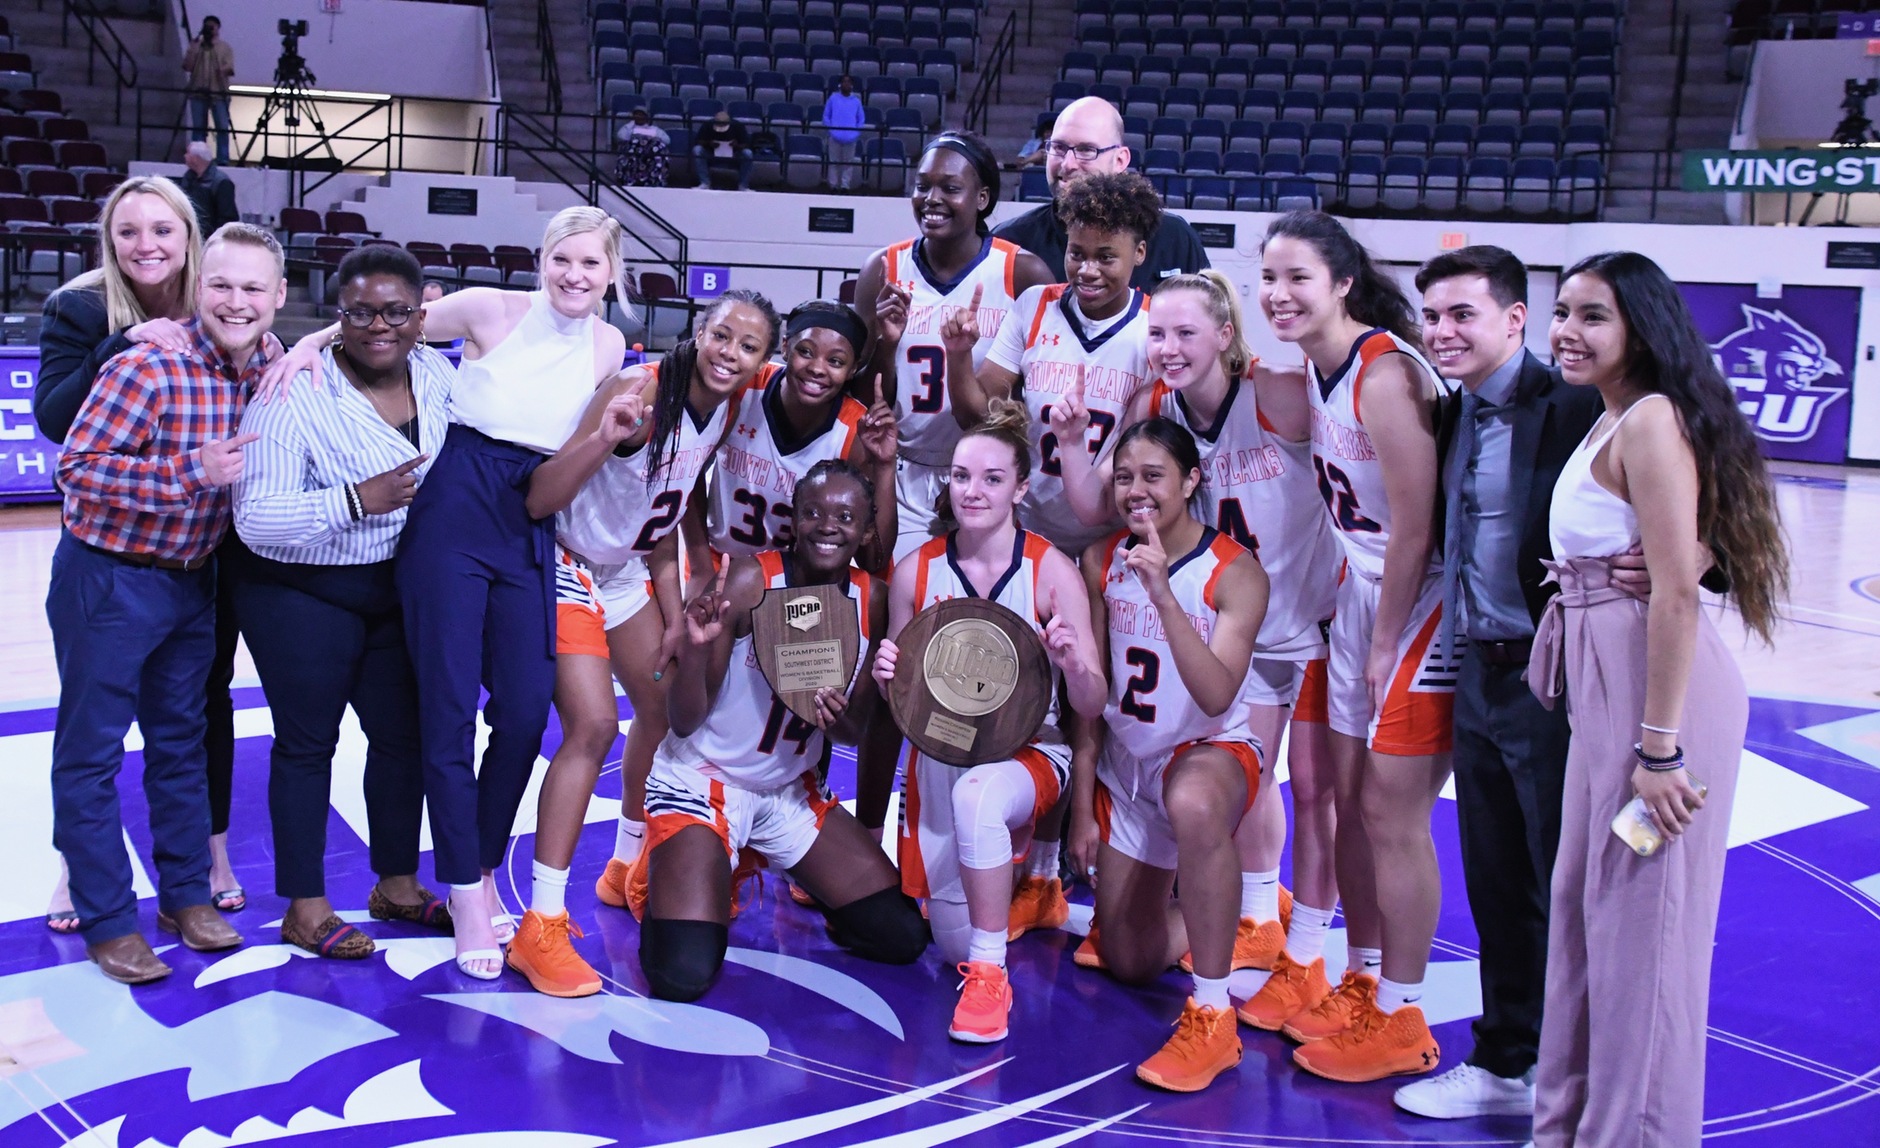 Lady Texans clinch Region V title with 74-64 victory over Collin County Saturday